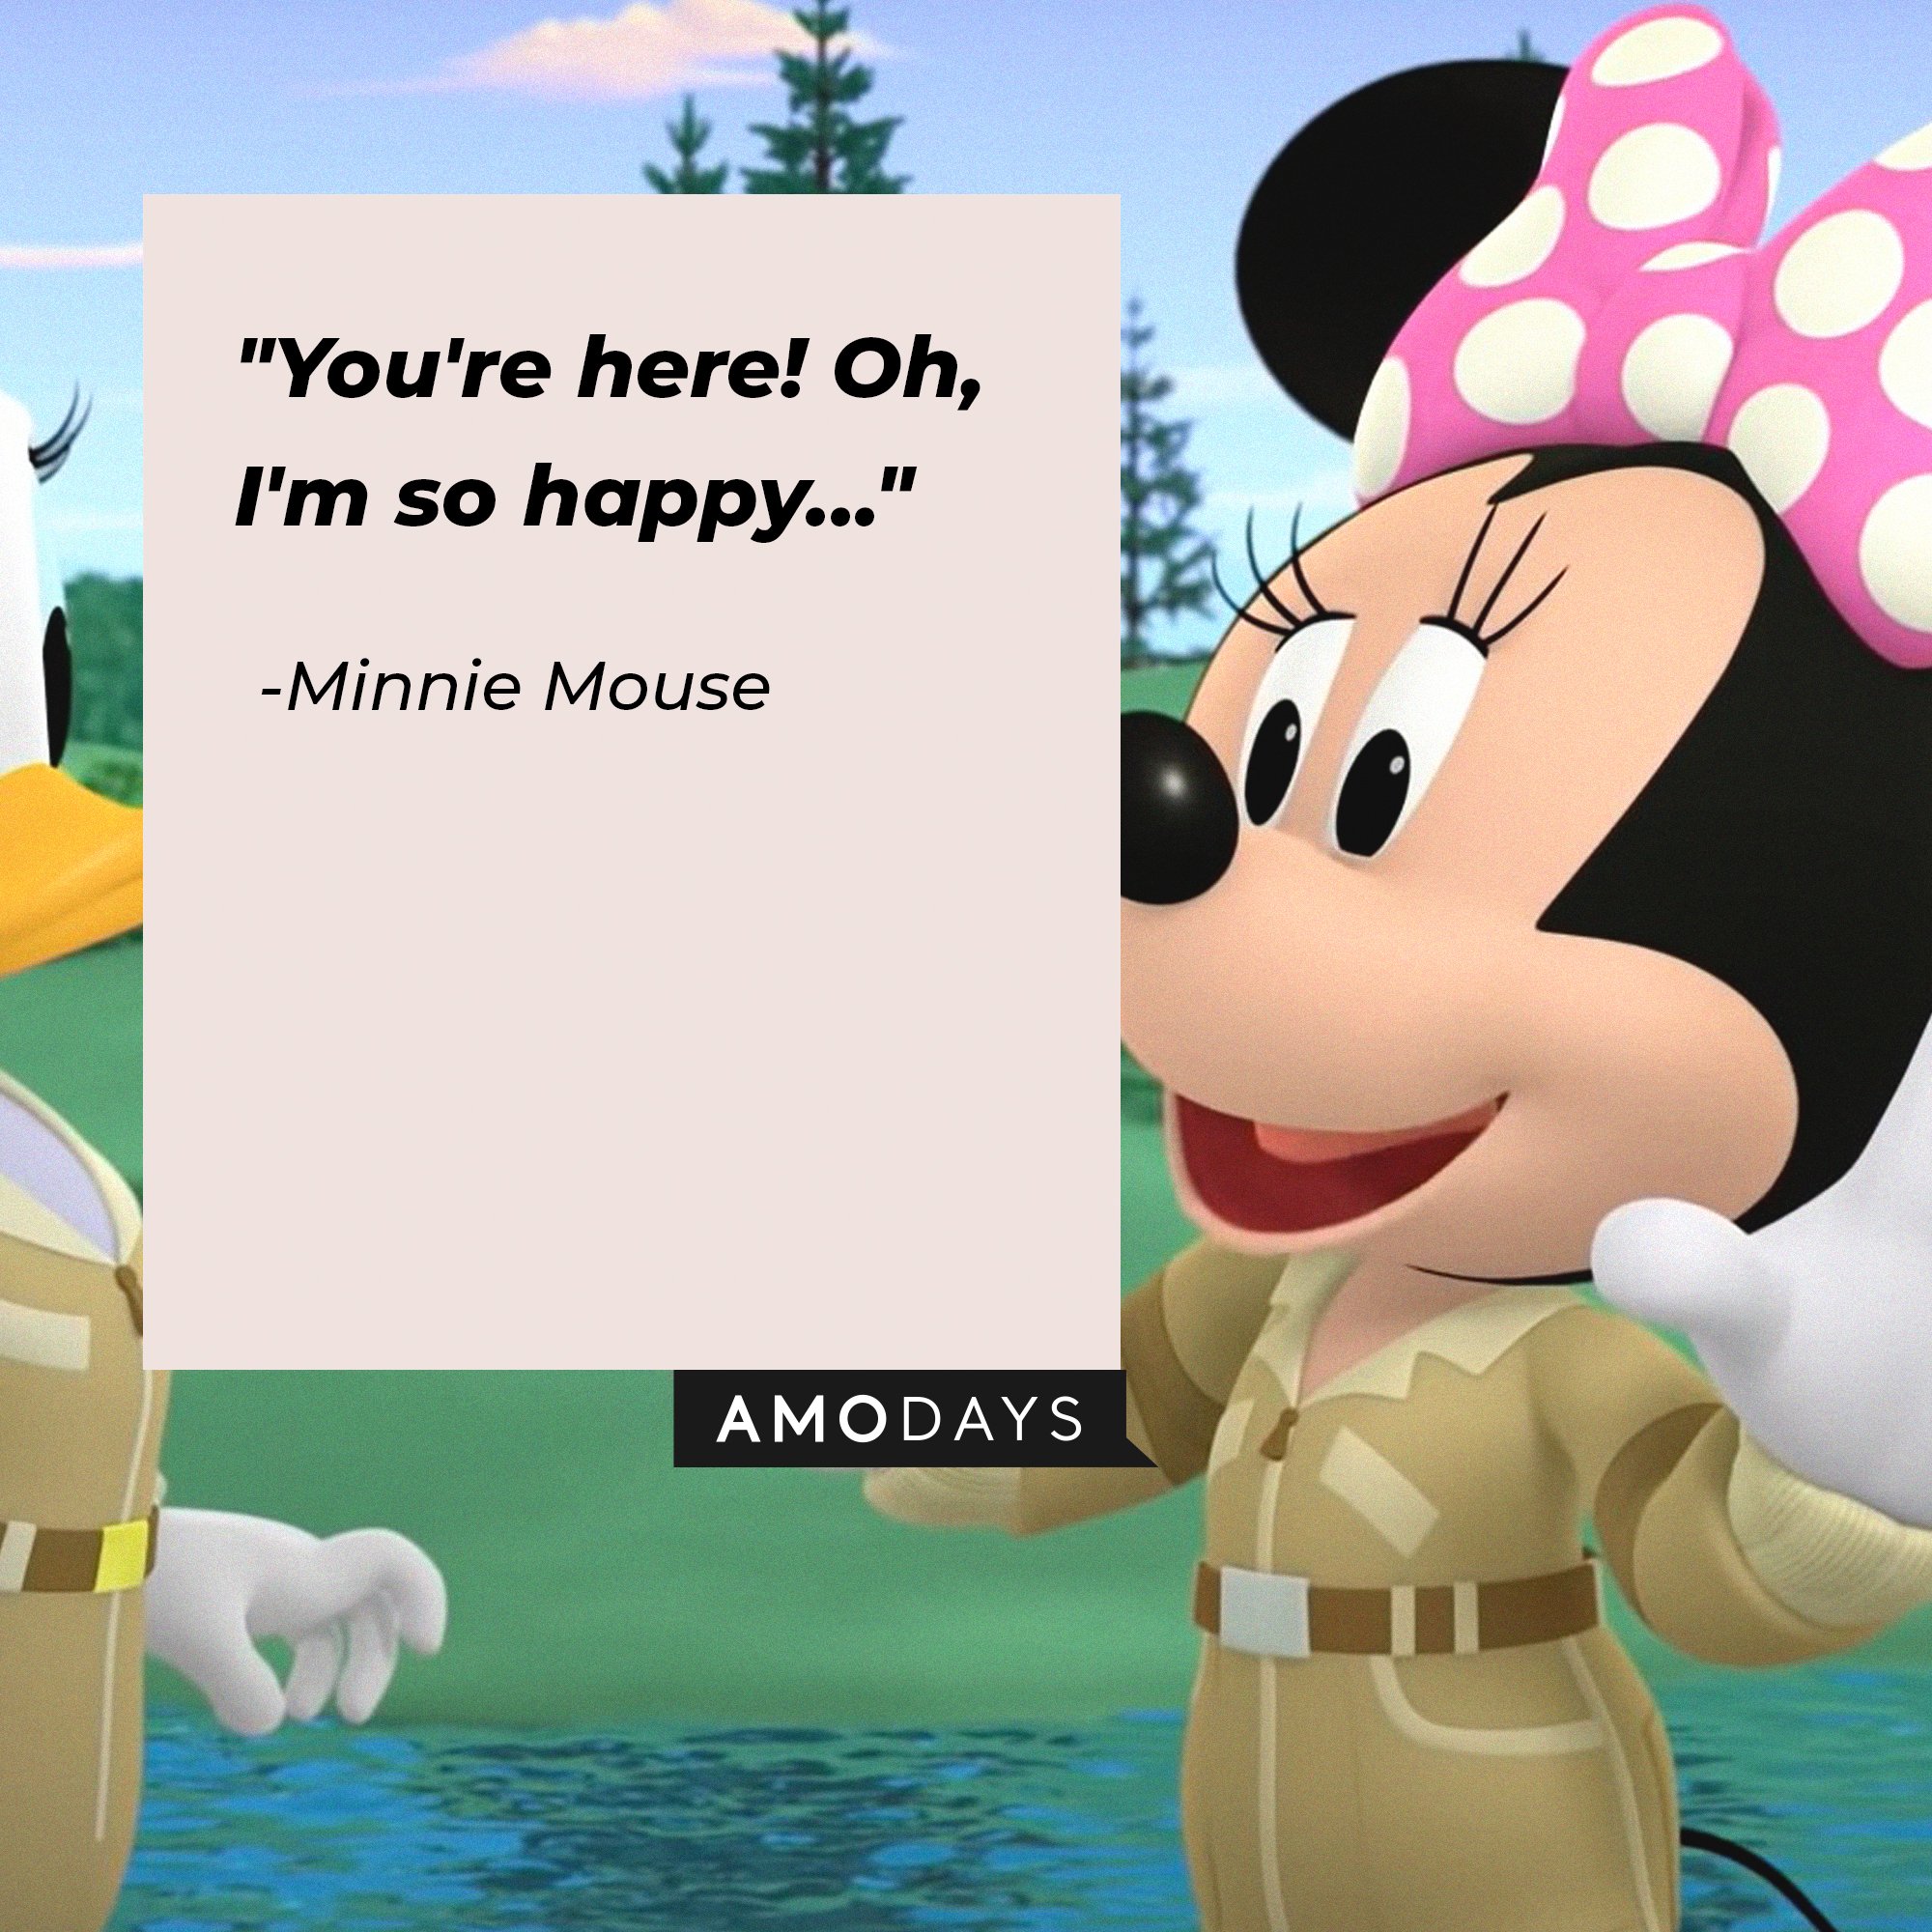  Minnie Mouse’s quote: "You're here! Oh, I'm so happy…" | Image: AmoDays